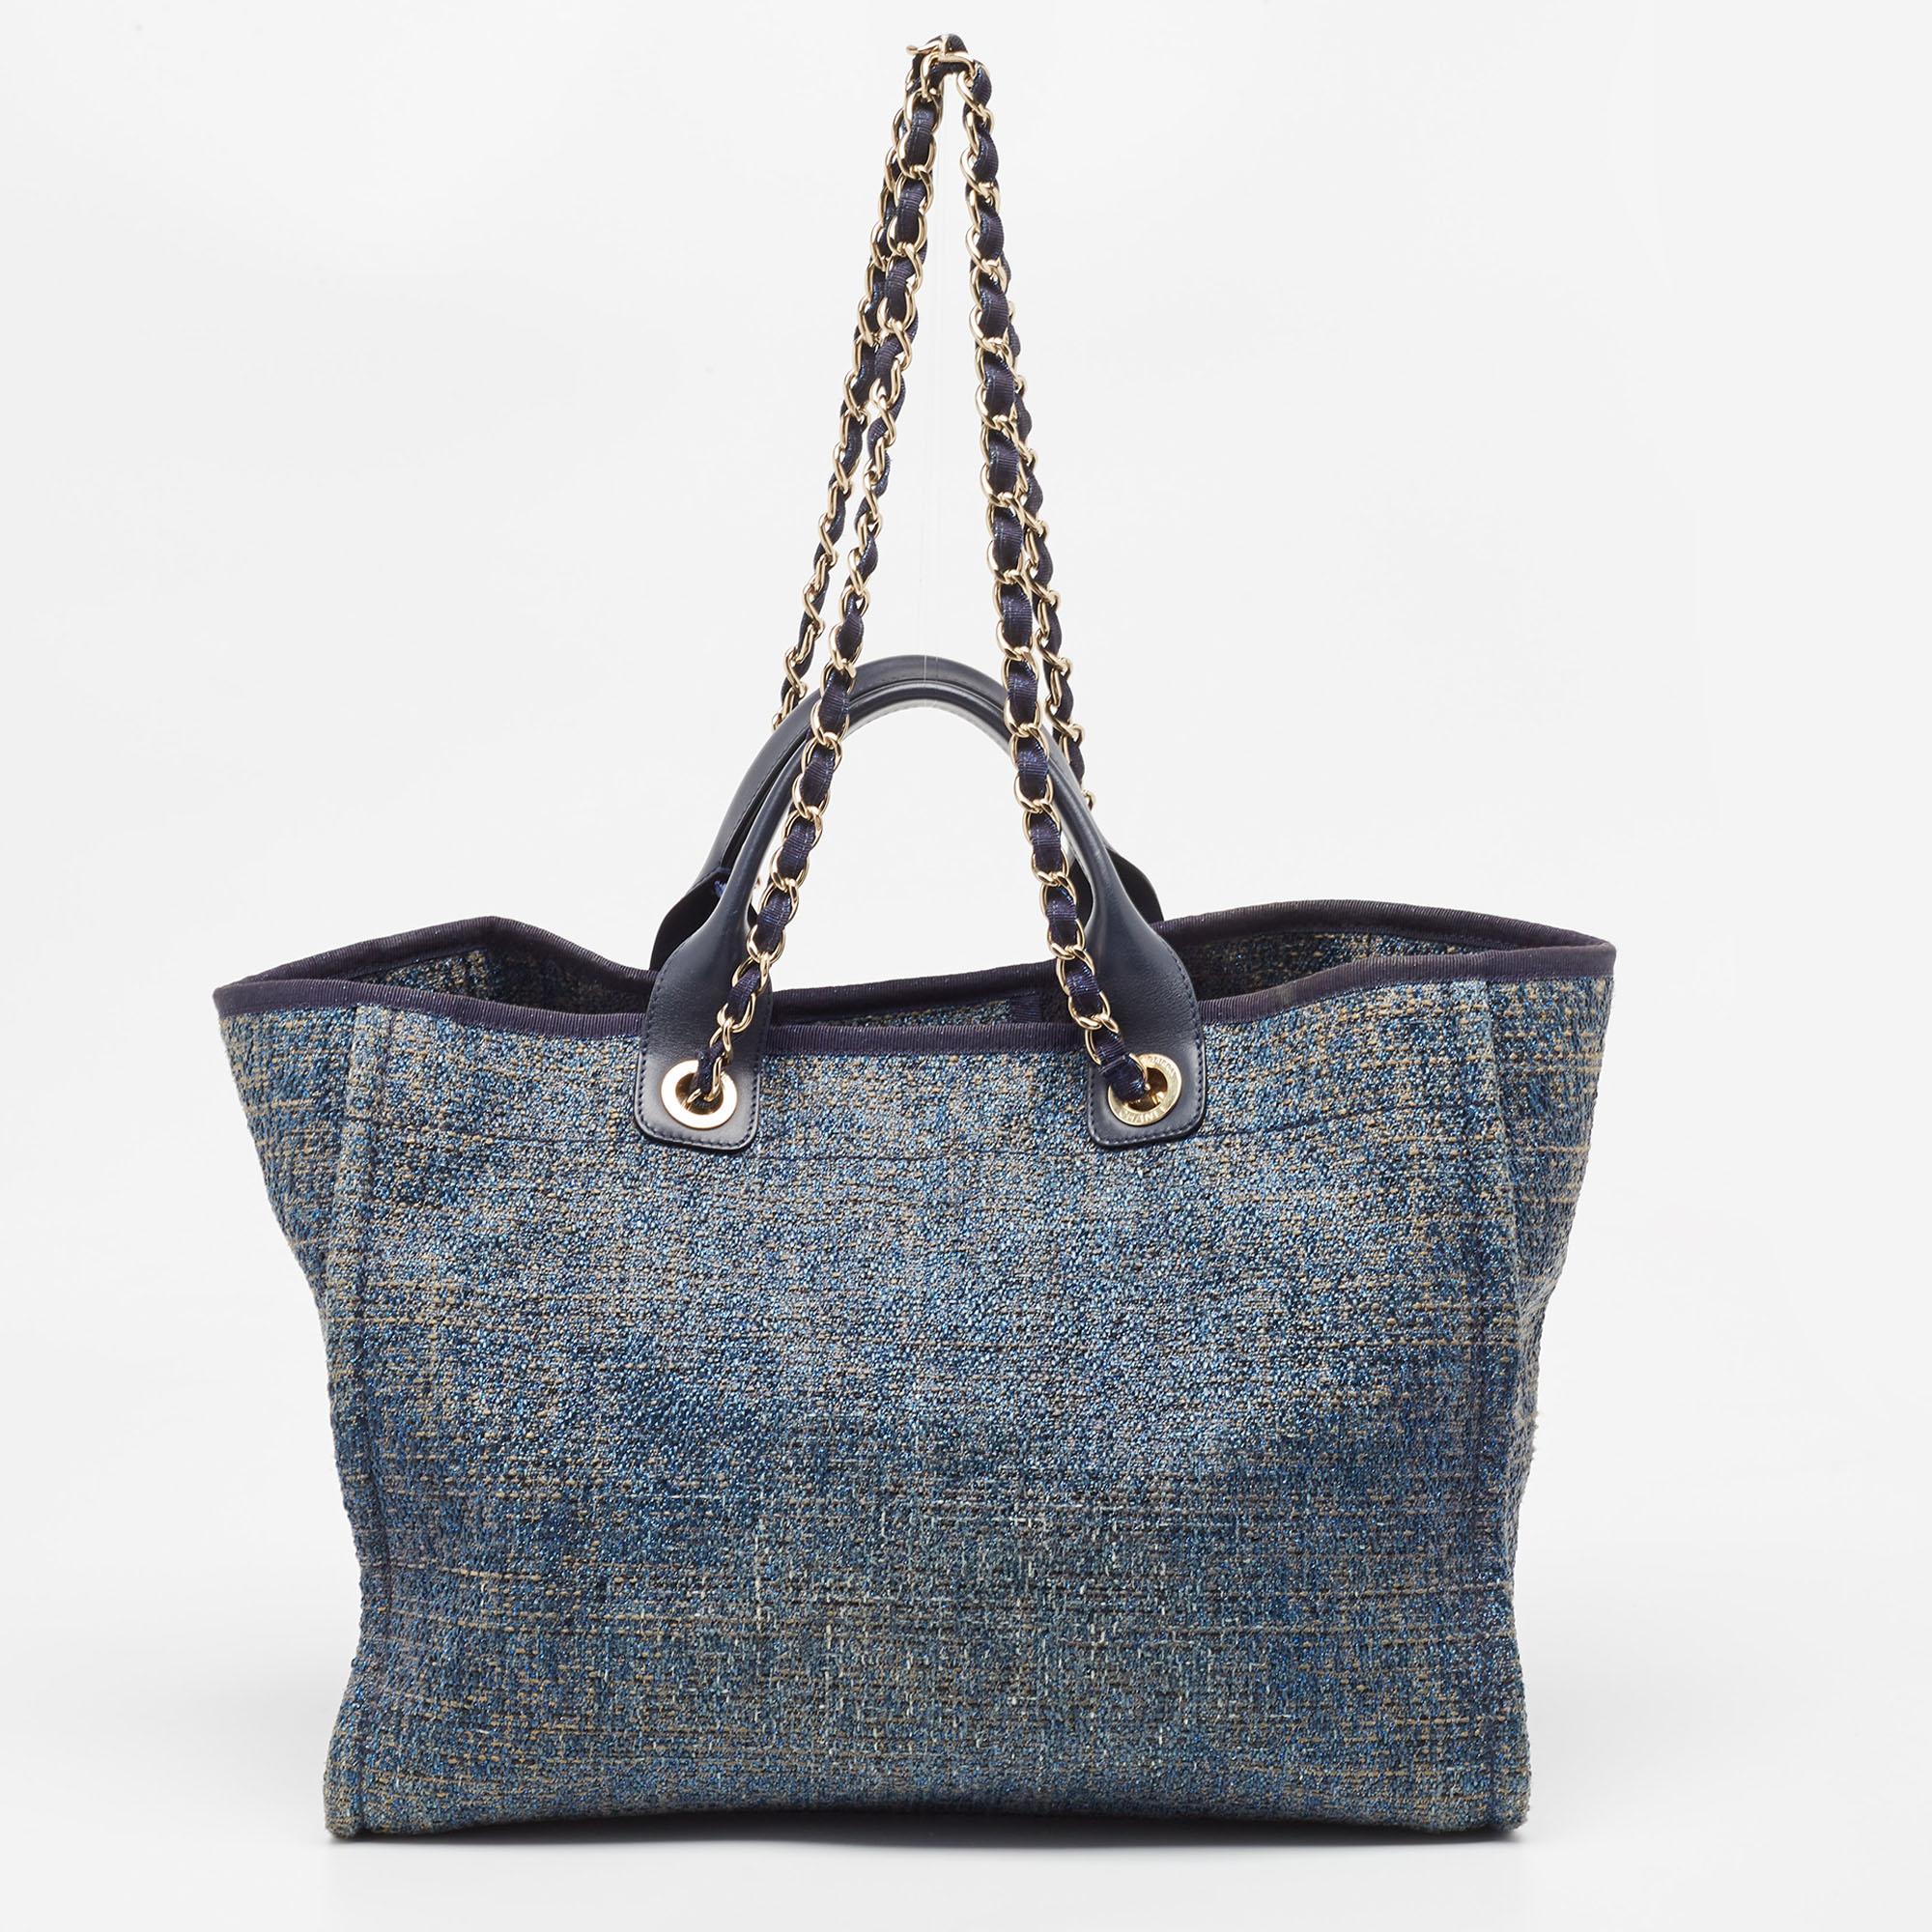 Chanel Blue Shimmer Tweed and Leather Large Deauville Shopper Tote 1